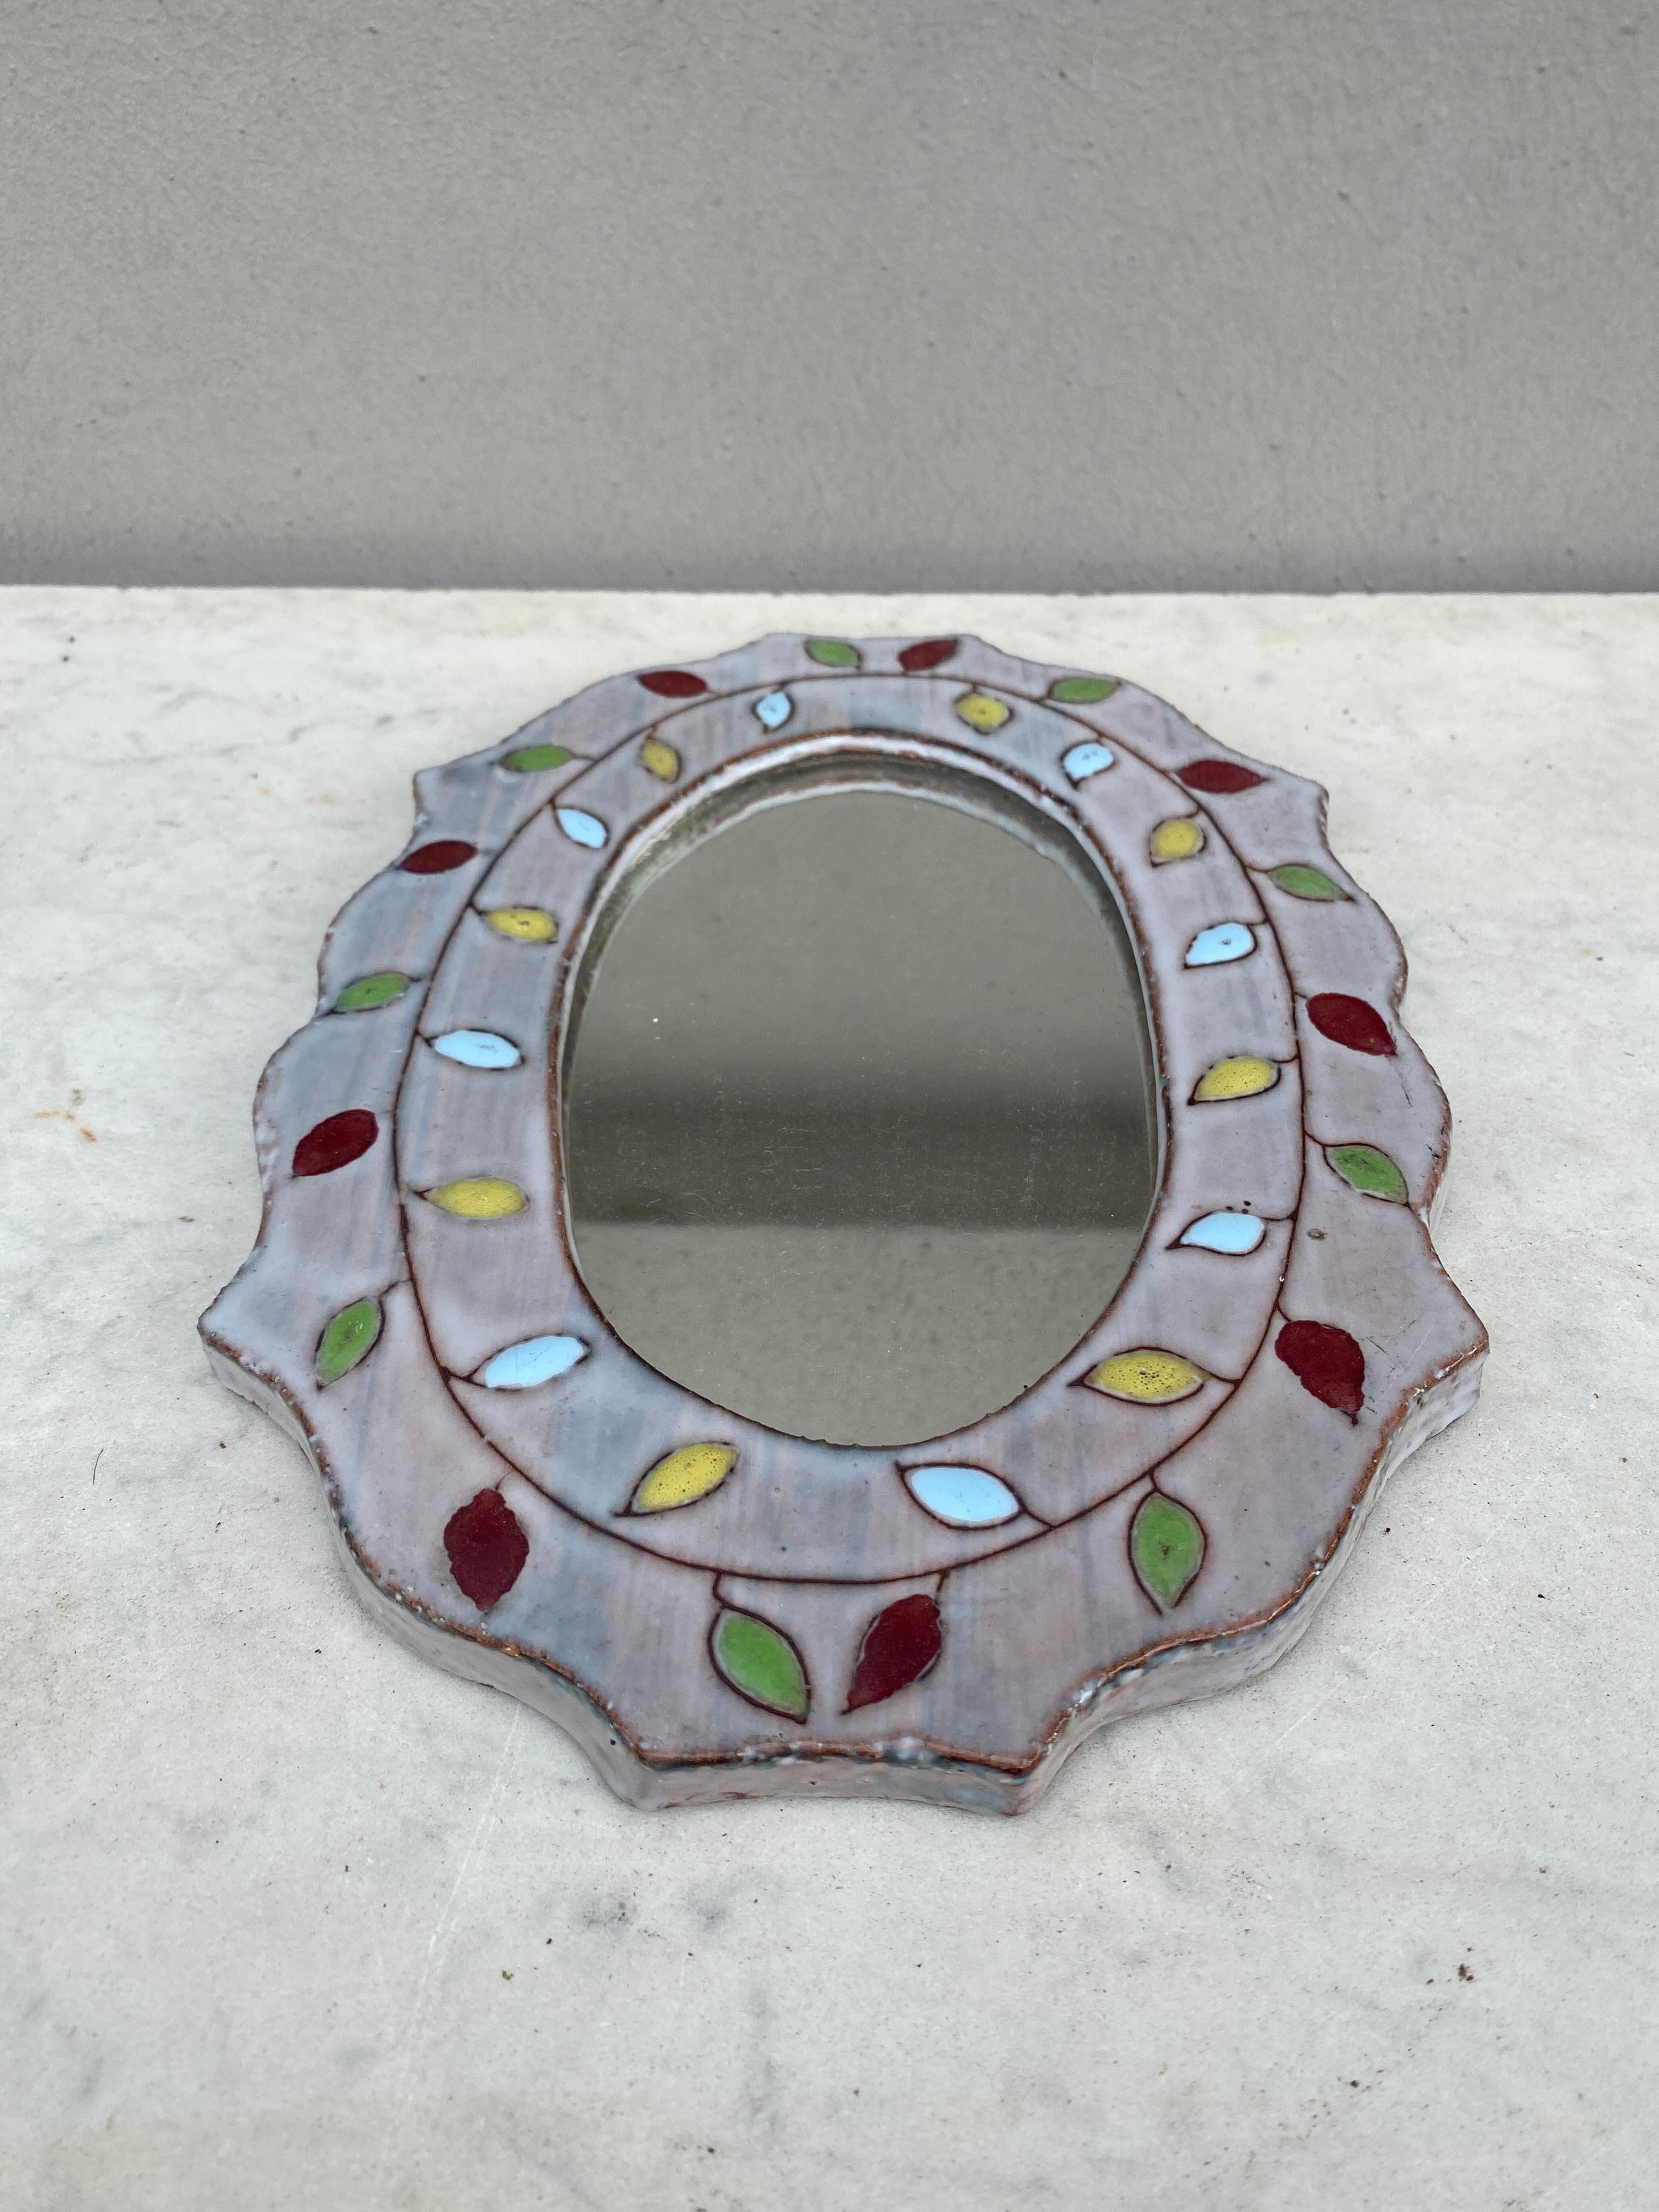 Mid-Century French Ceramic Leaves Oval Mirror.
Height / 9.8 inches.